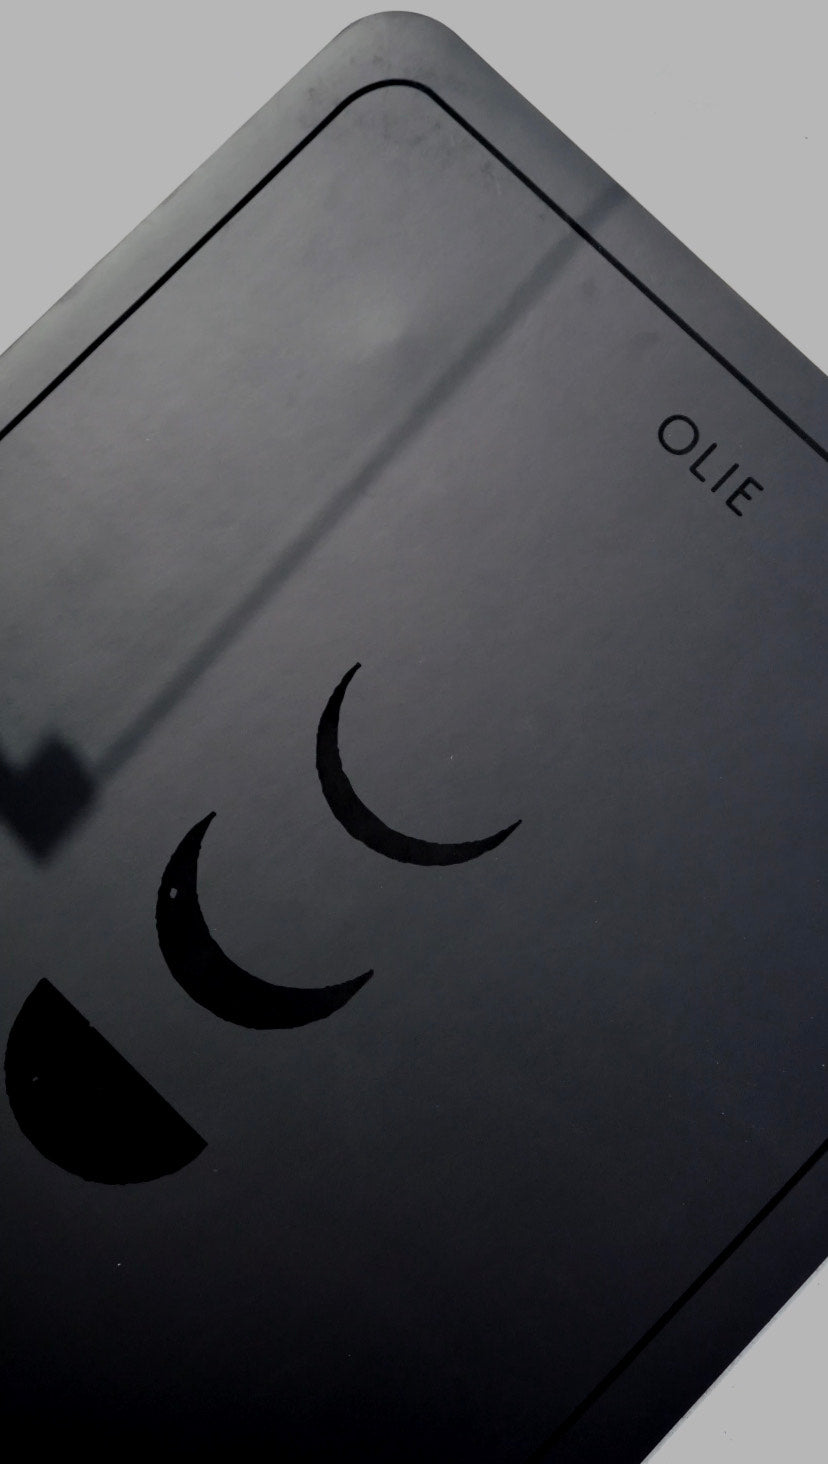 OLIE BLACK MOON MAT - The worlds grippy and comfortable mat